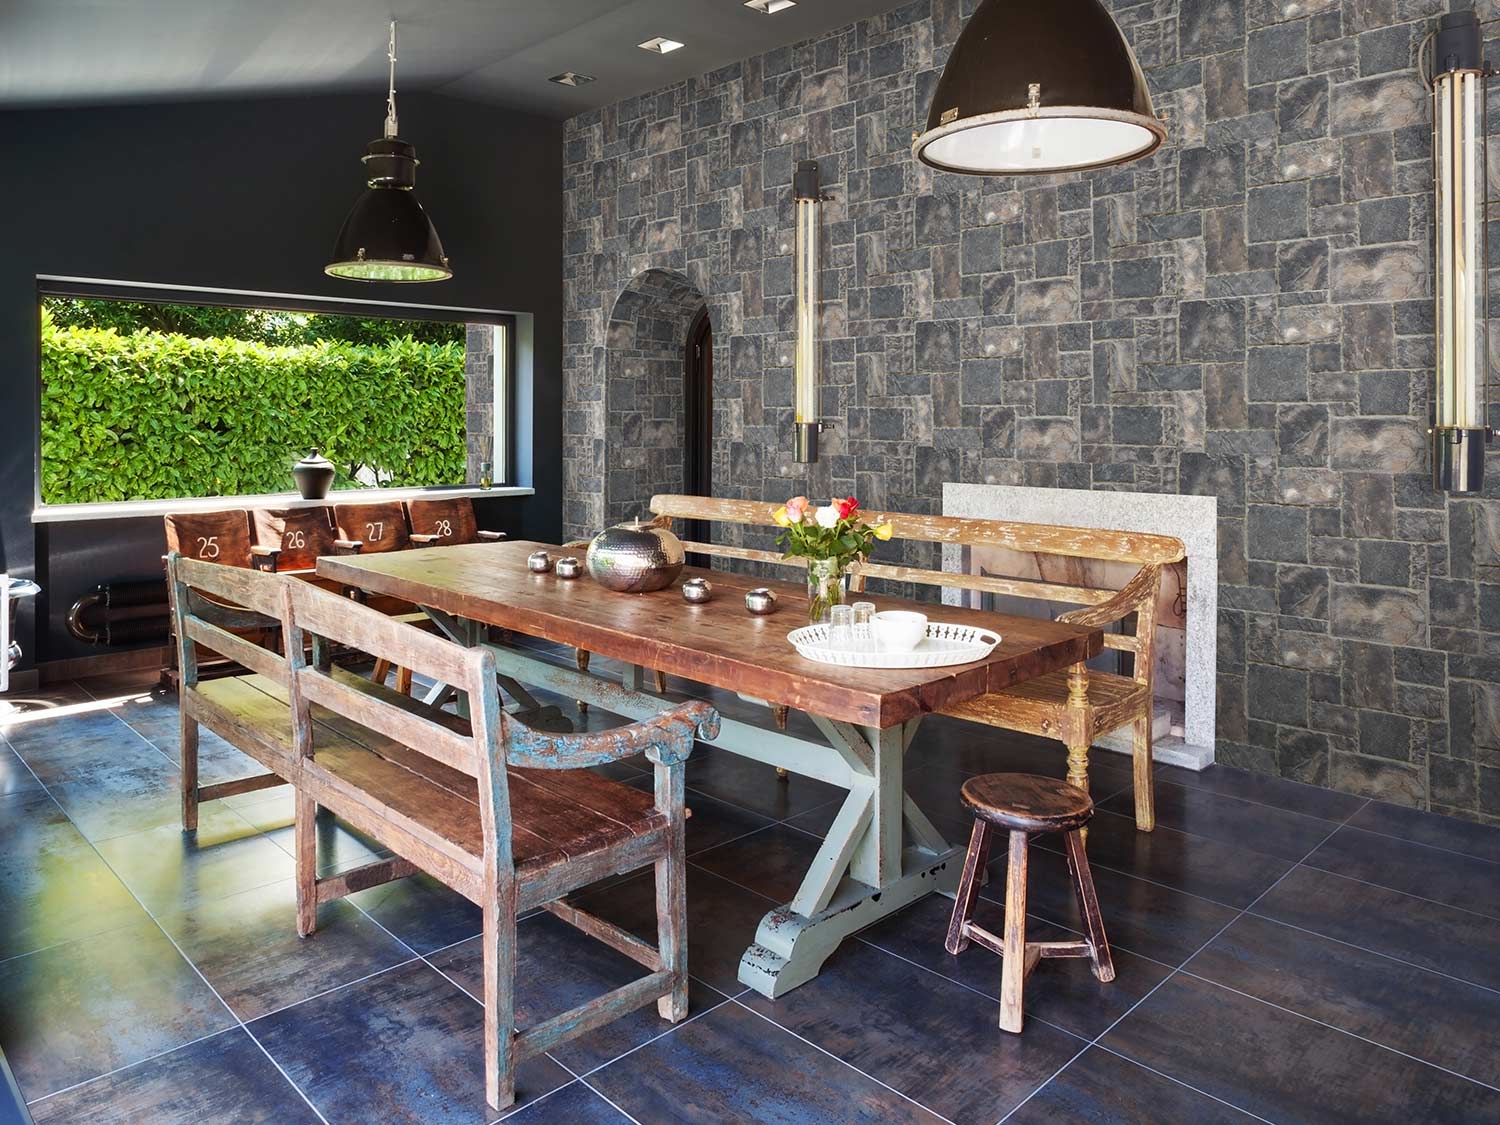 Carolina Chiseled Faux Stone Wall Panel in Mist as a back patio dining backdrop